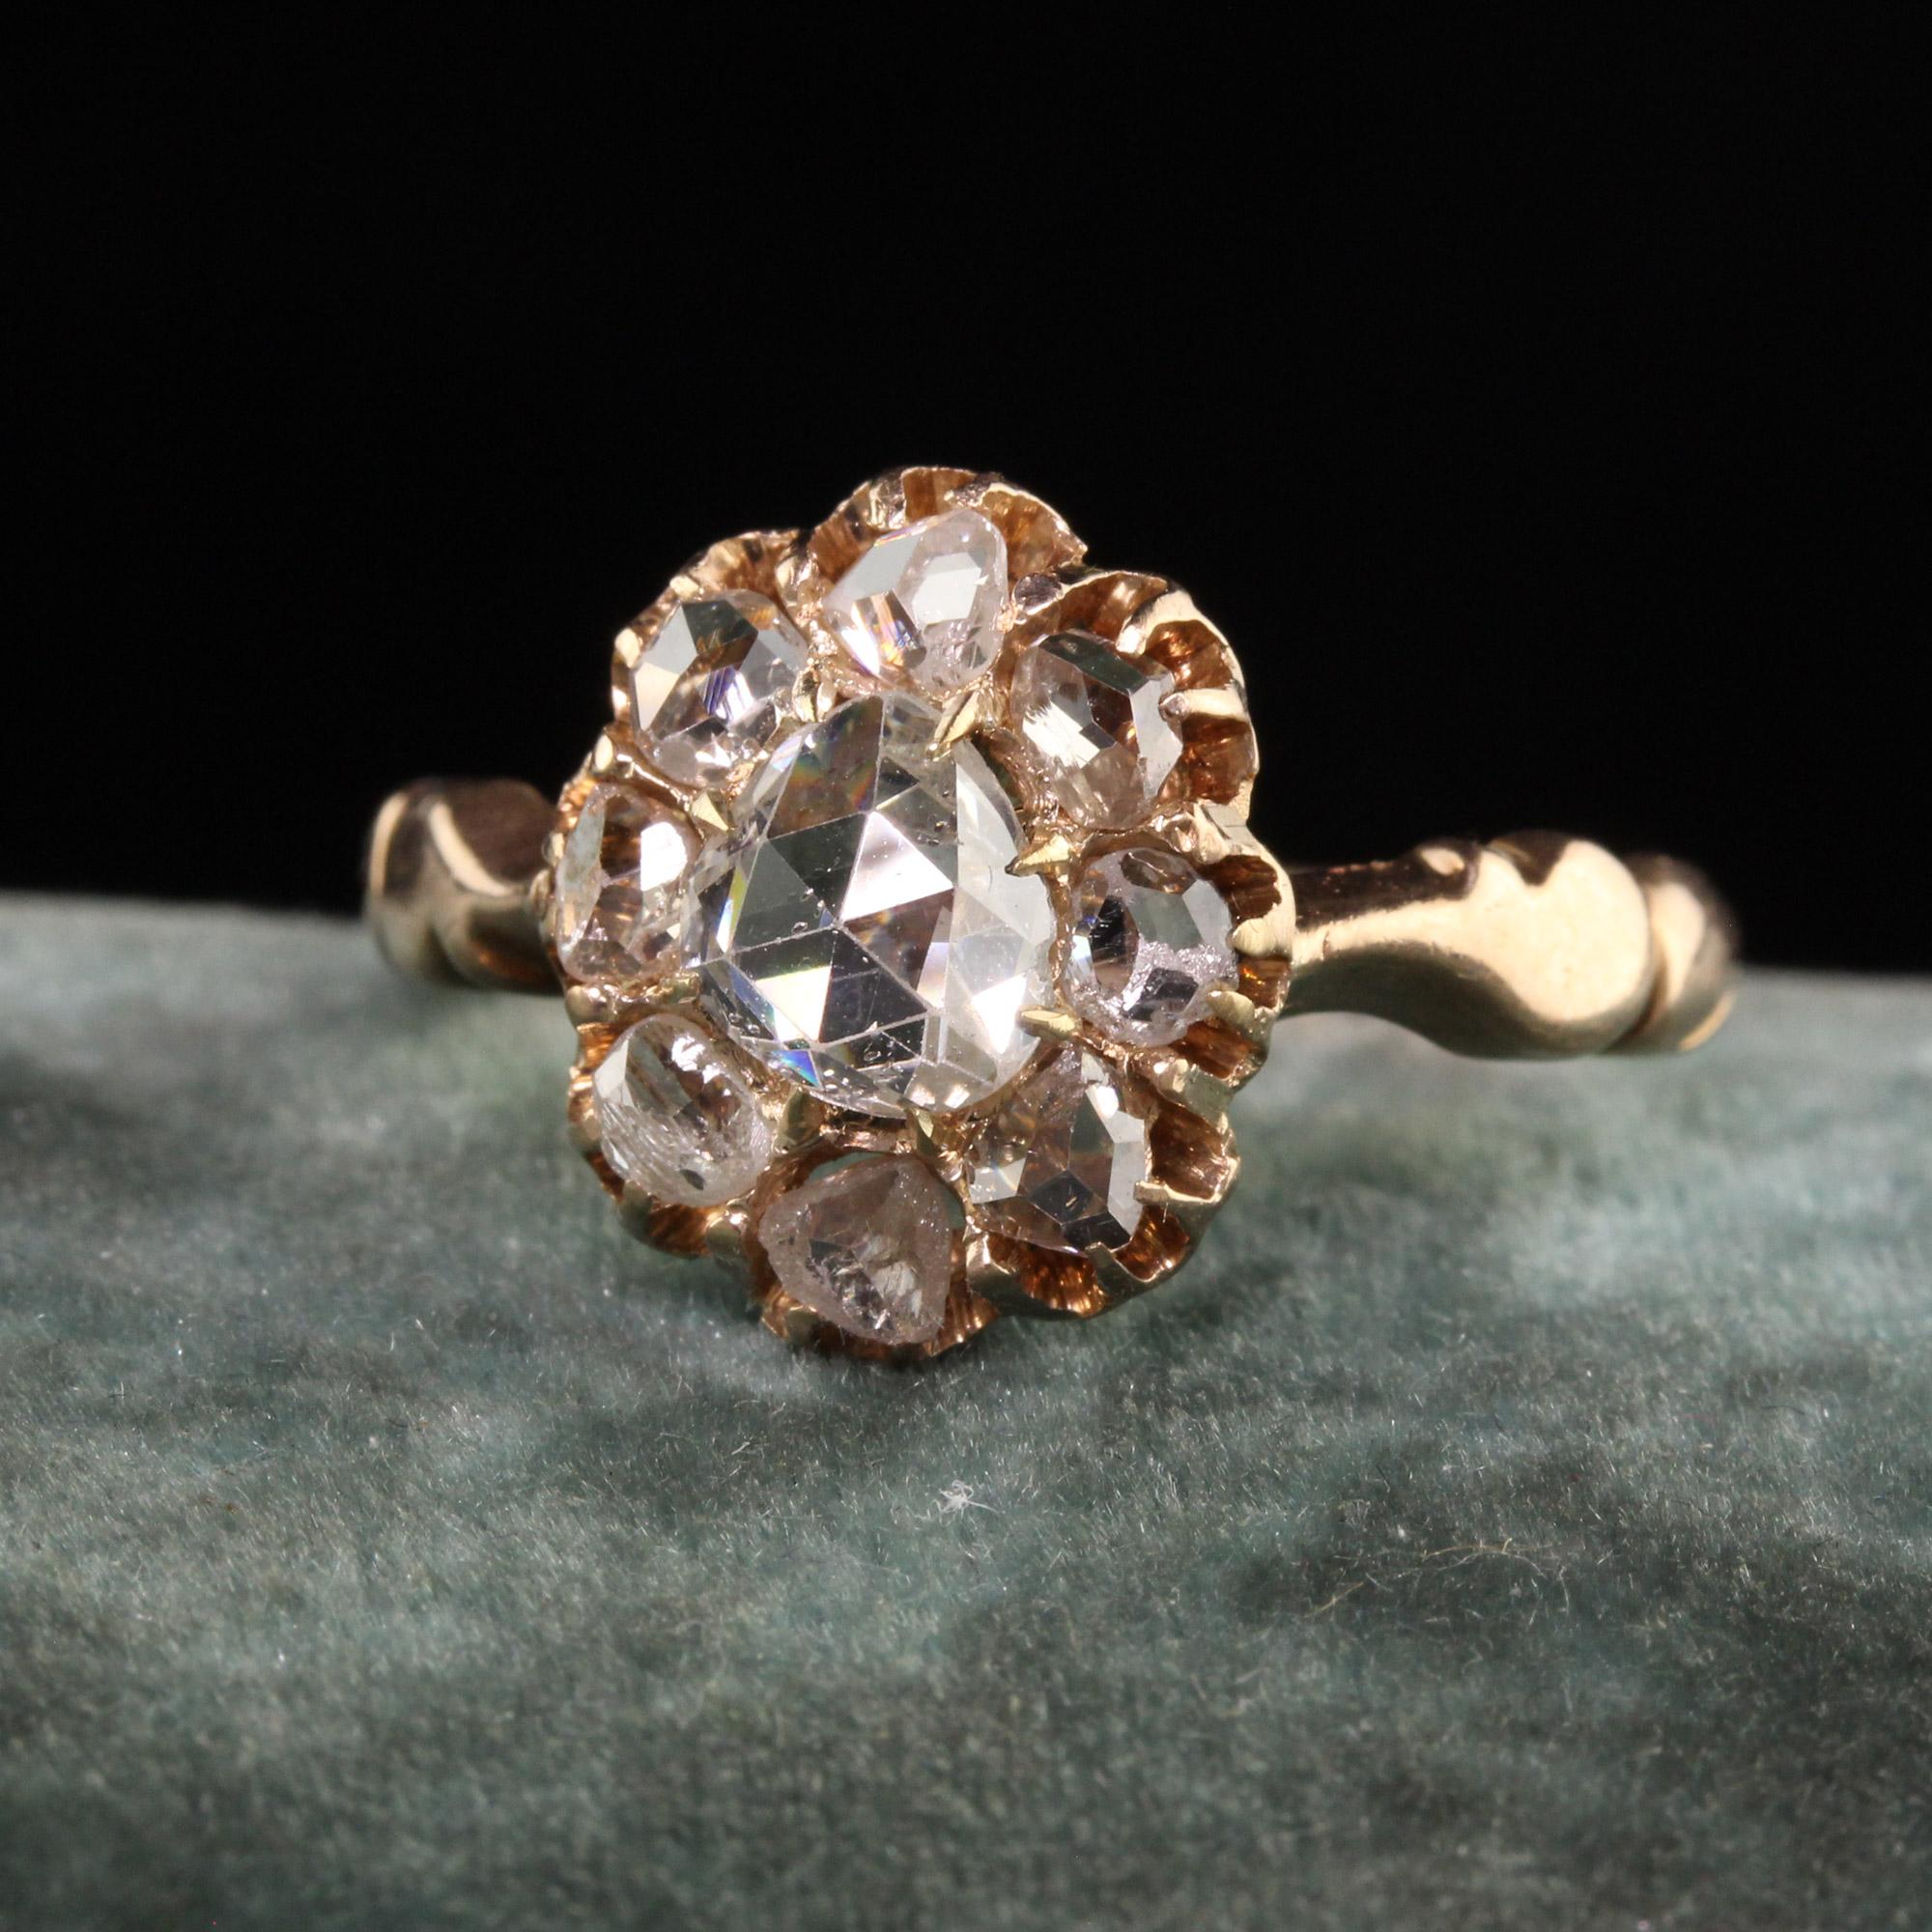 Beautiful Antique Victorian 18K Yellow Gold Rose Cut Diamond Engagement Ring. This gorgeous engagement ring has a domed rose cut diamond in the center of a low profile Victorian mounting surrounded by more rose cut diamonds.

Item #R1066

Metal: 18K